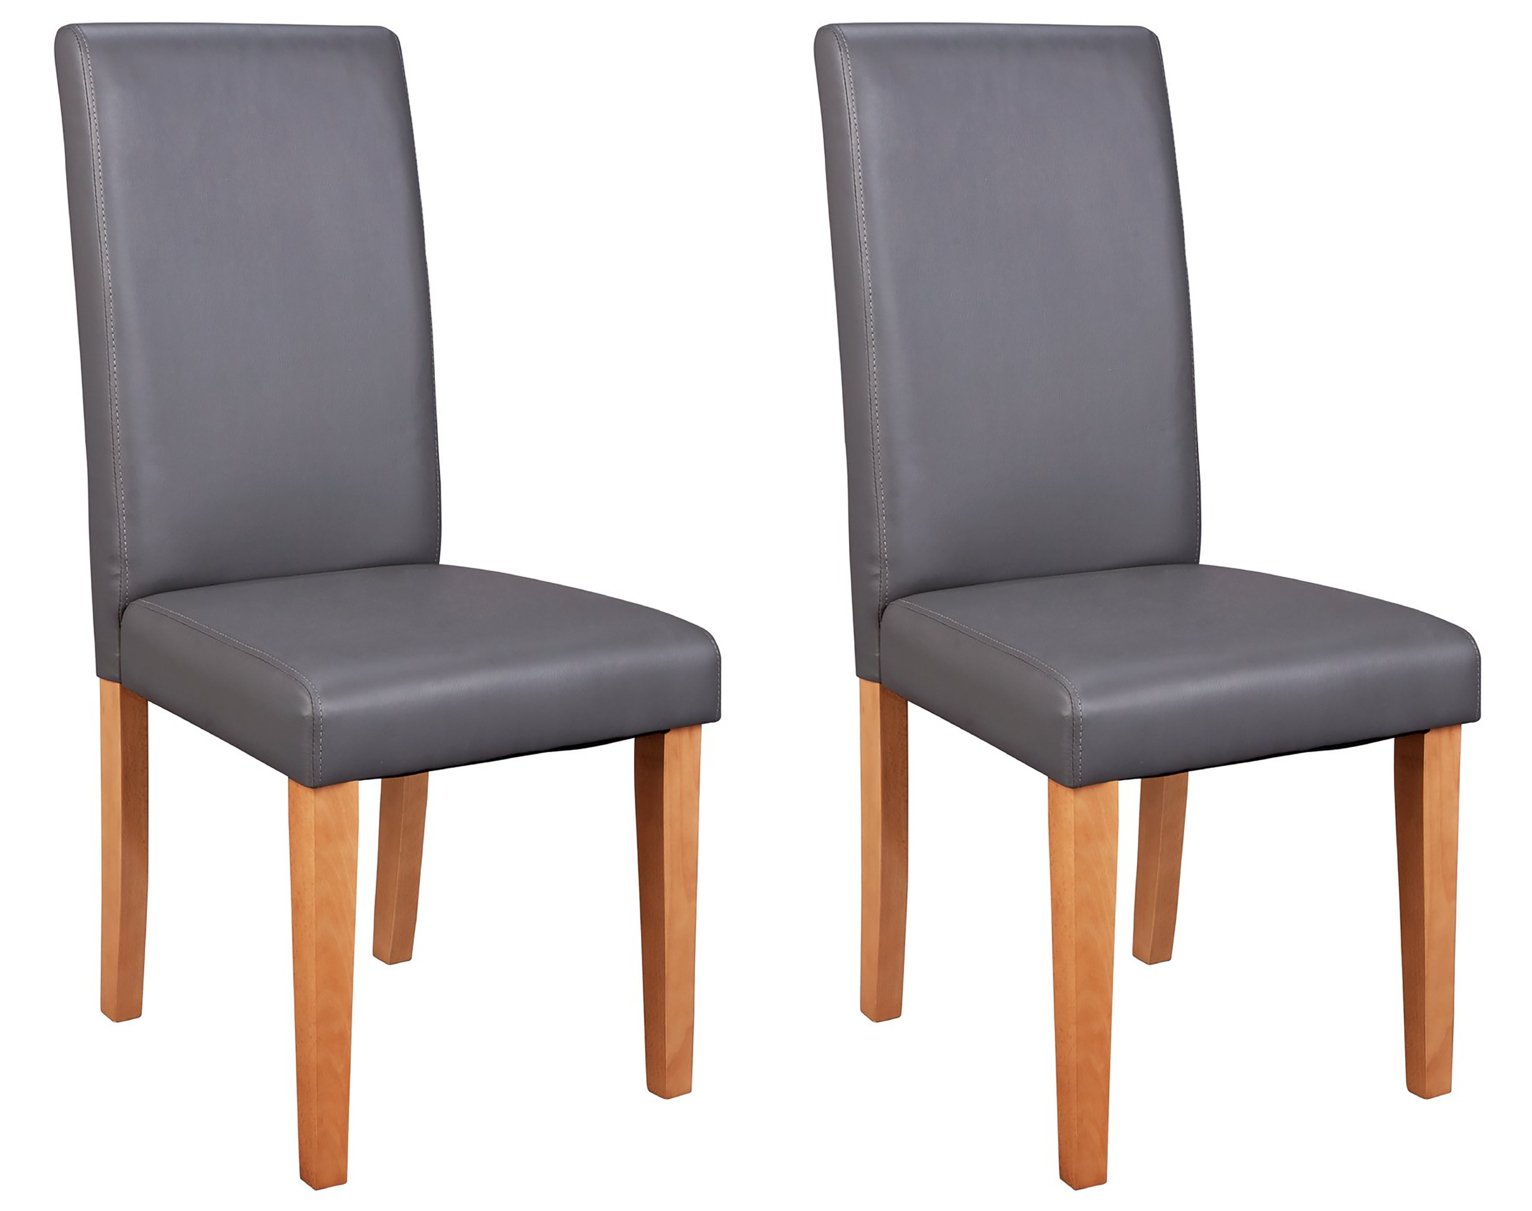 Habitat Pair of Midback Dining Chairs - Charcoal